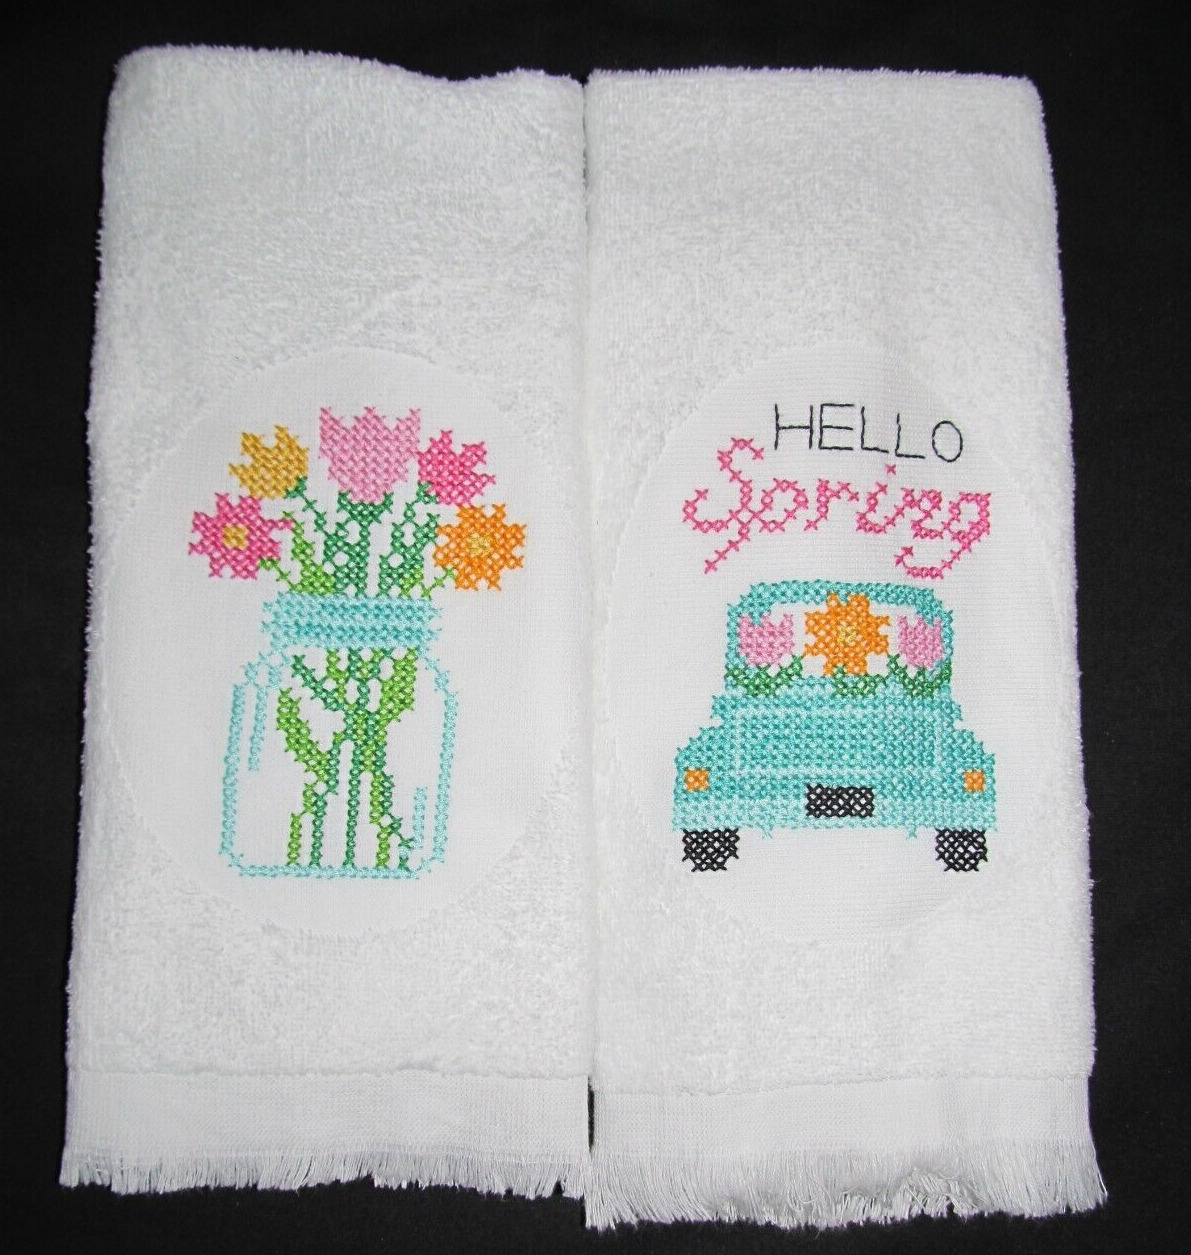 Finished Completed Cross Stitched Terry Towels Spring Floral Hand Stitched